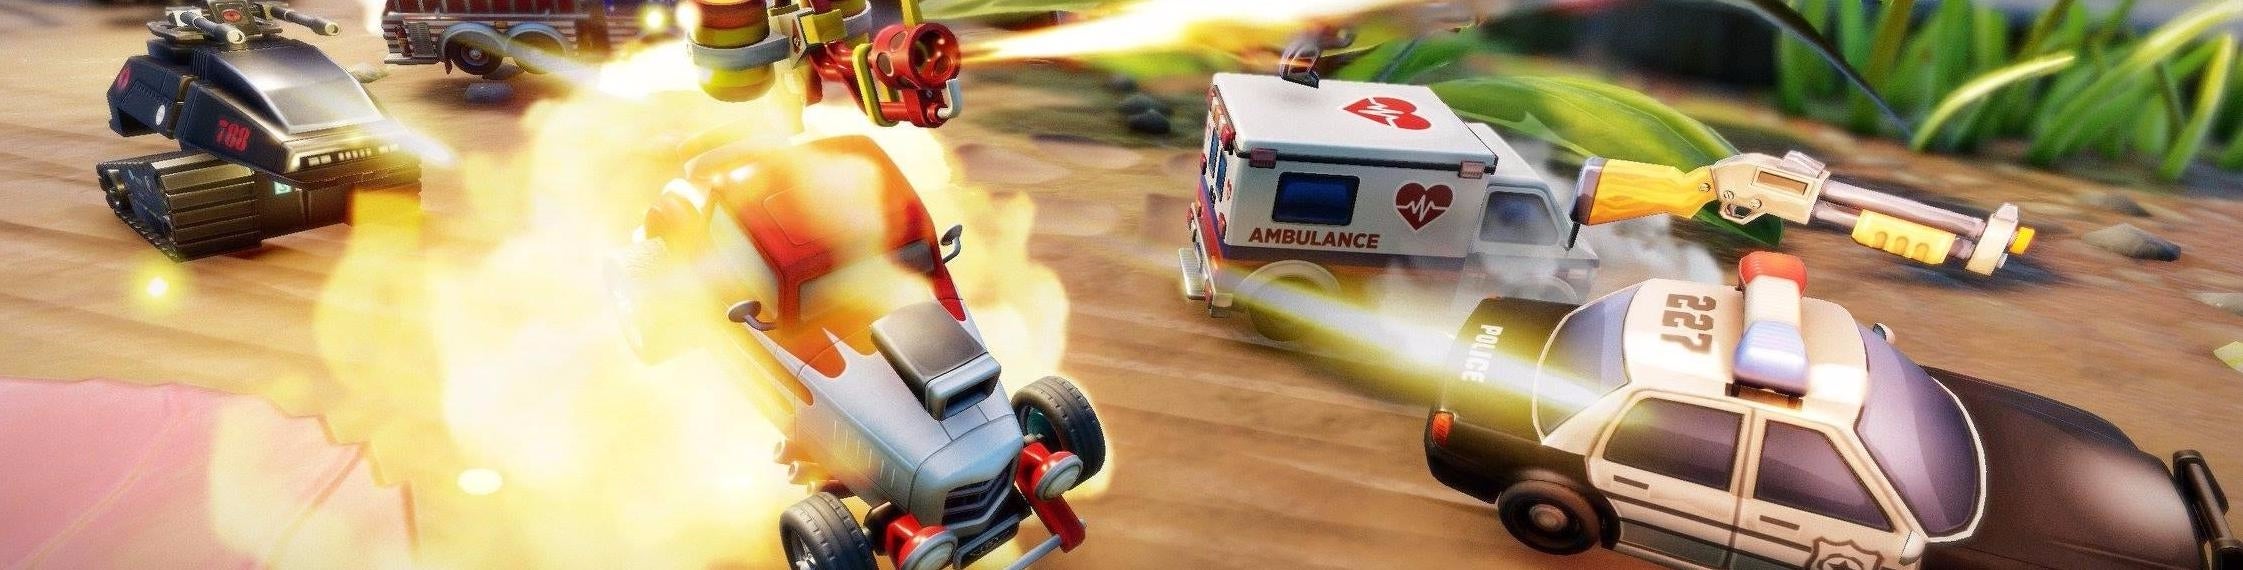 Image for Watch: Eurogamer takes on Outside Xbox at Micro Machines World Series